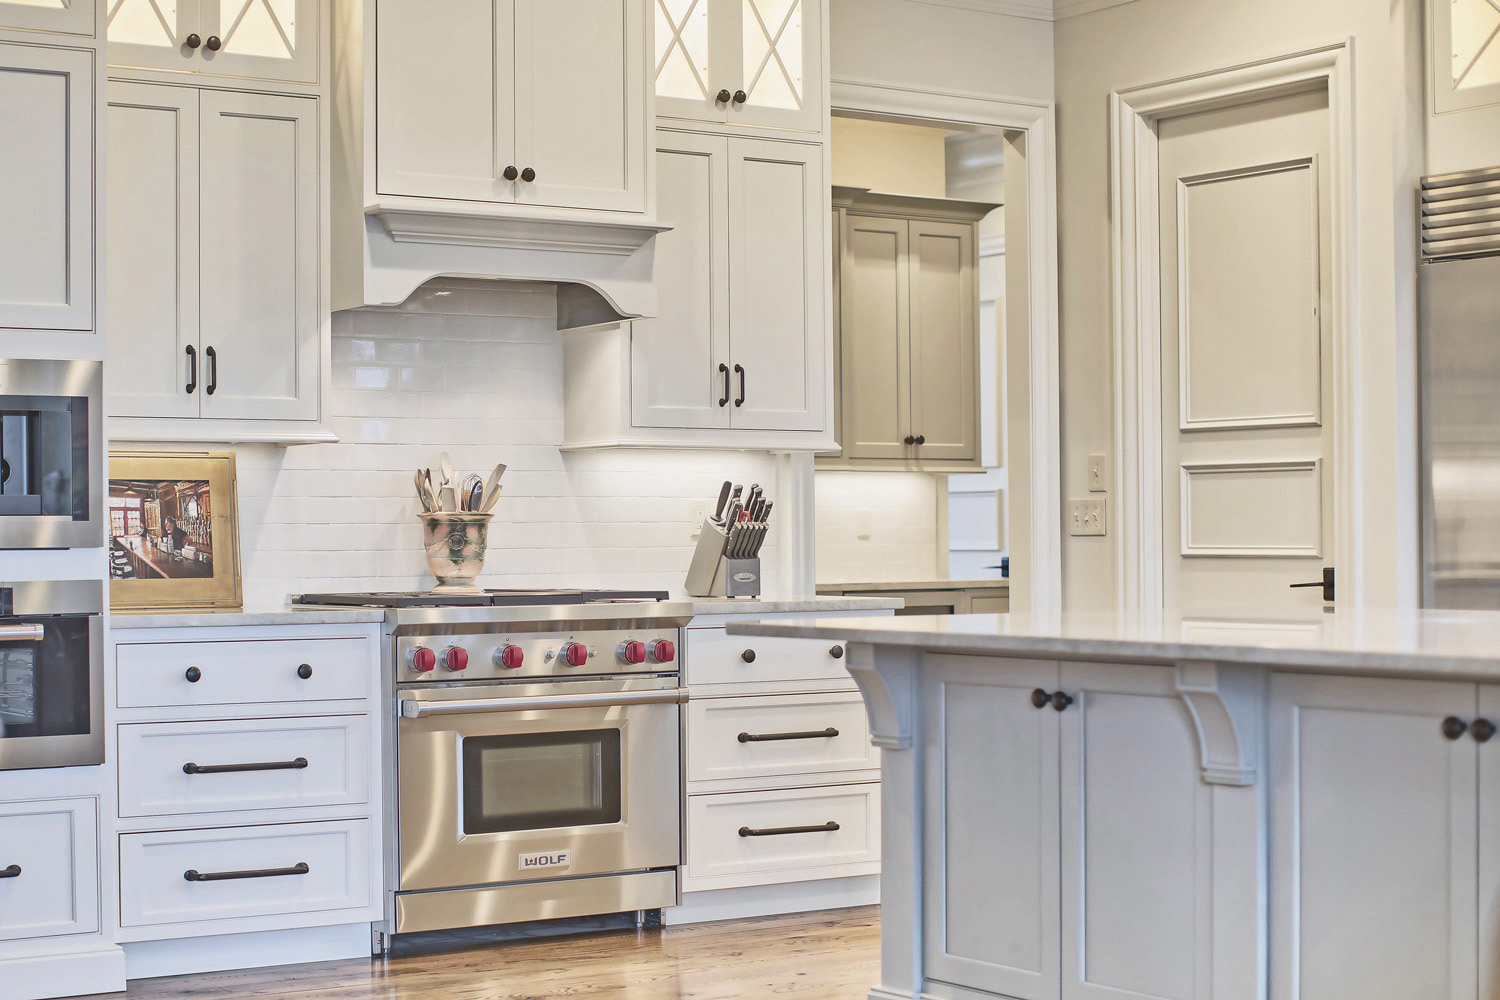 What Are The Estimated Kitchen Remodel Costs In Tuscaloosa